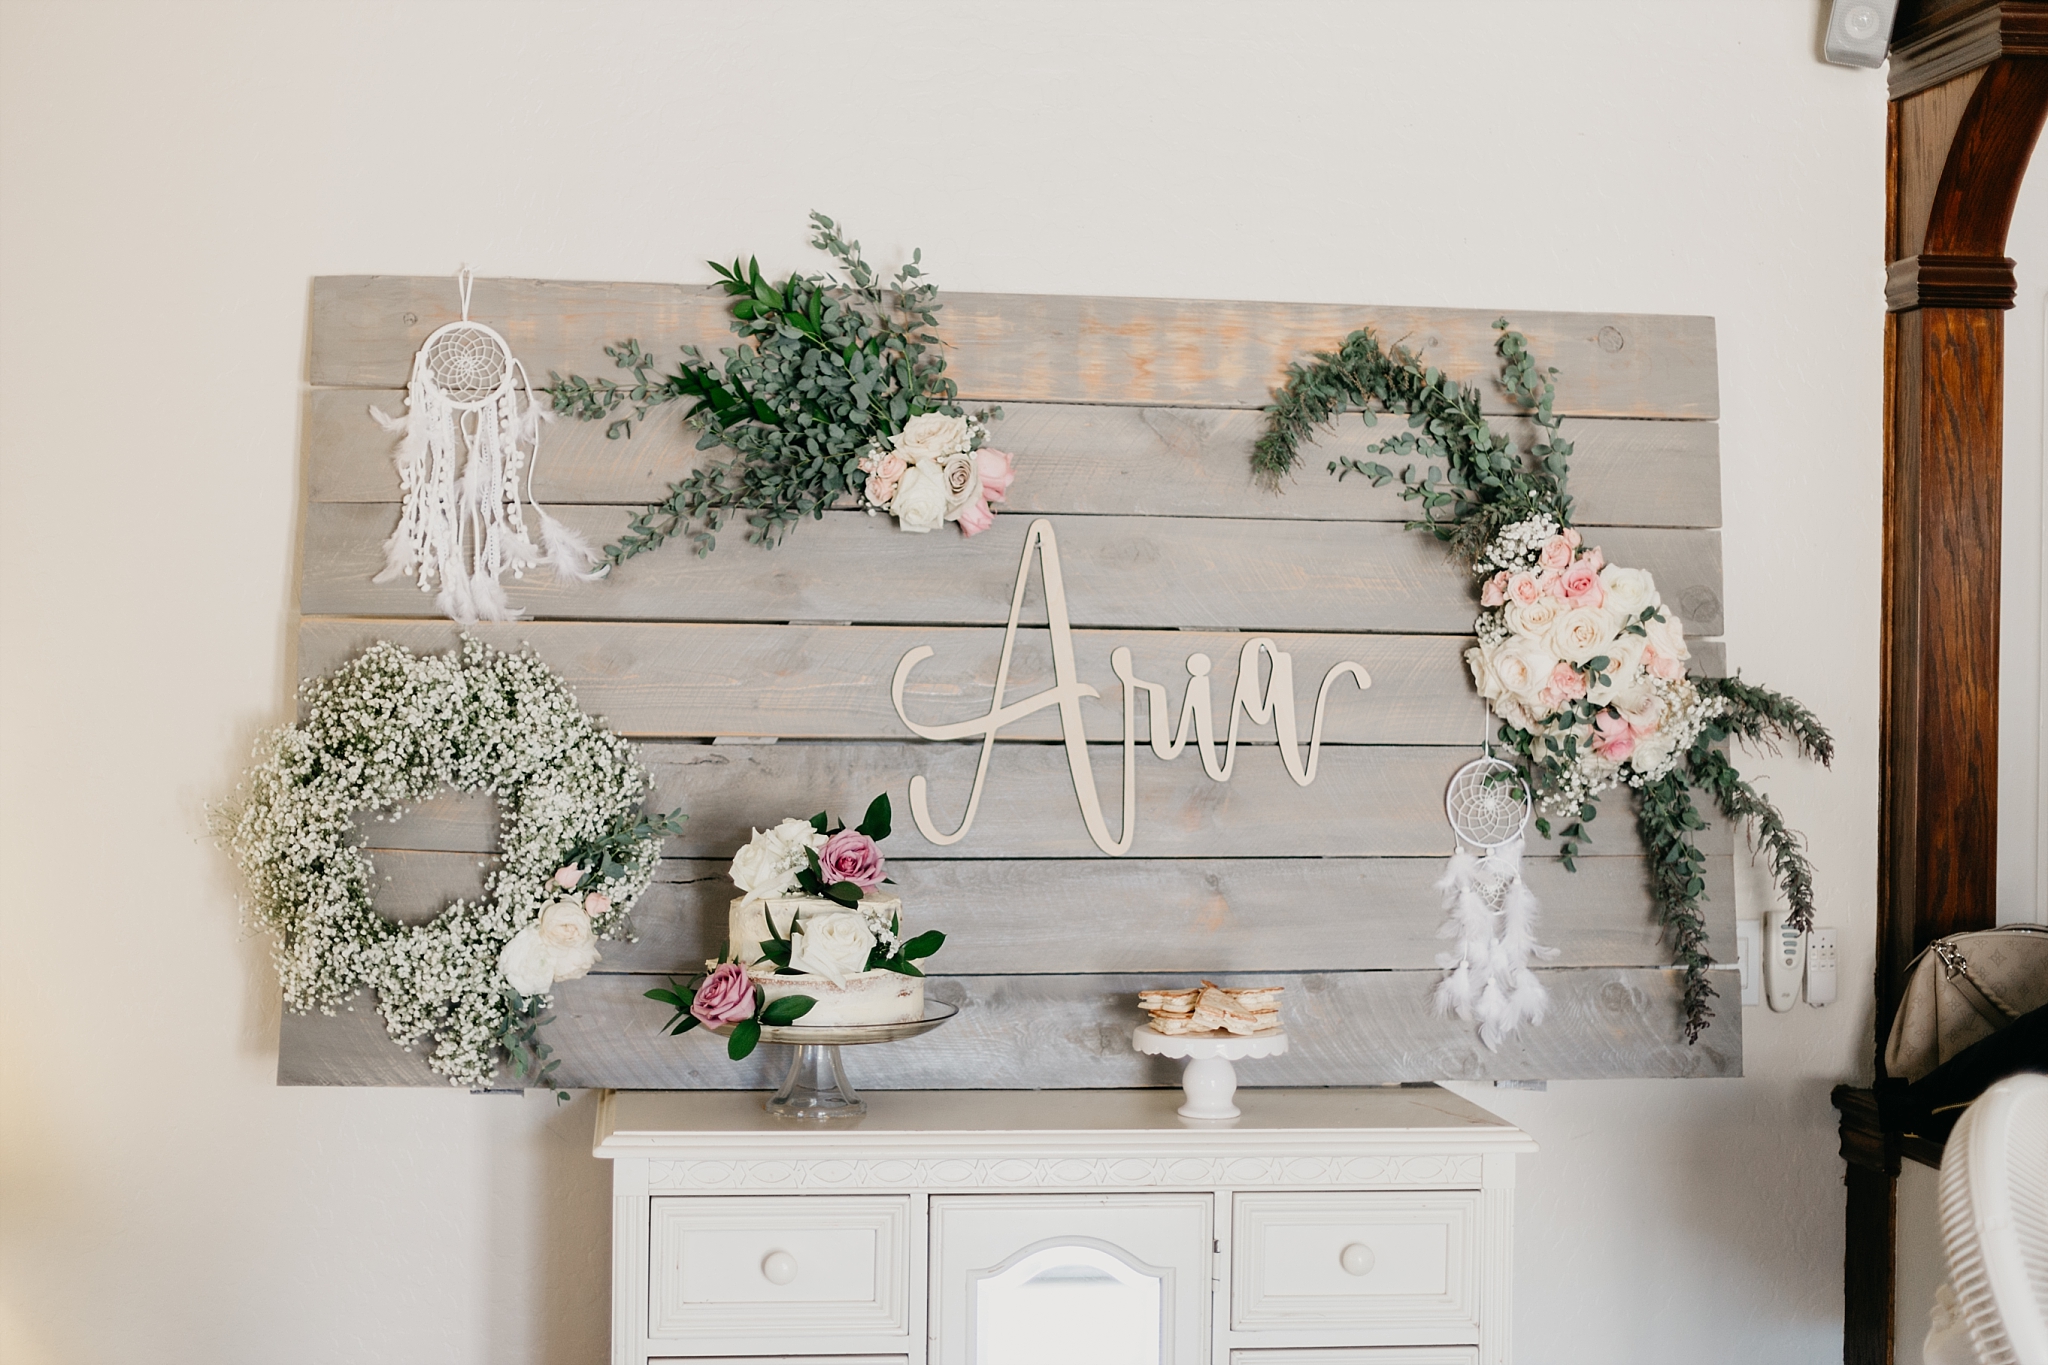 backyard baby shower photos deco ink designs wood calligraphy sign Moelleux Events Samantha Patri Photography